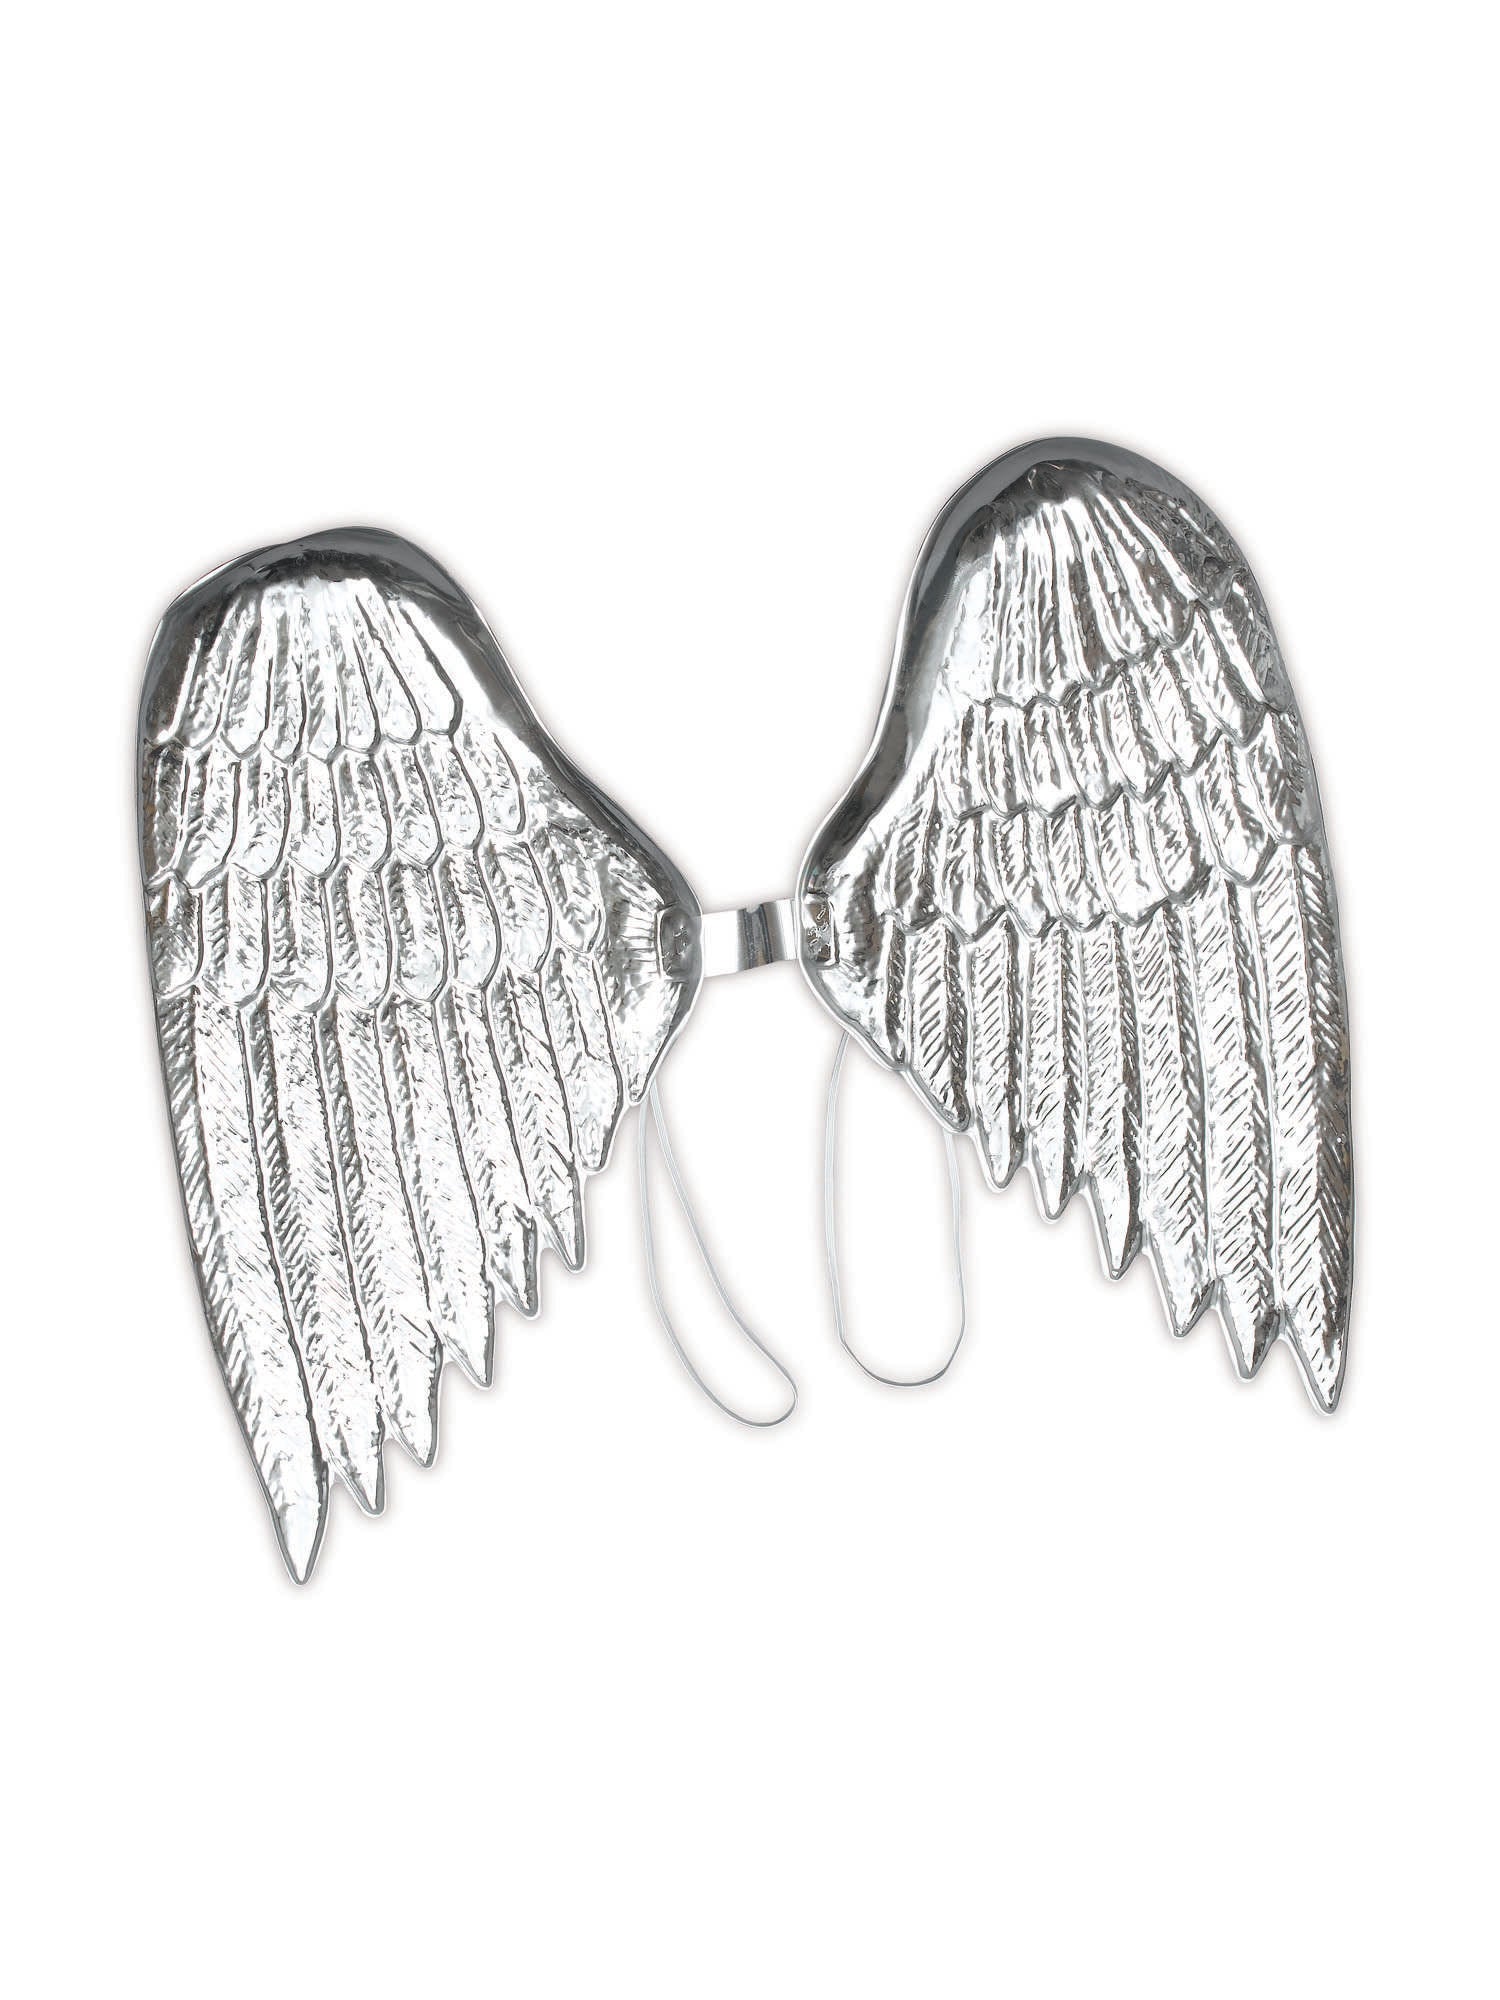 Angel Wings, Silver, Generic, Accessories, Adult, Front